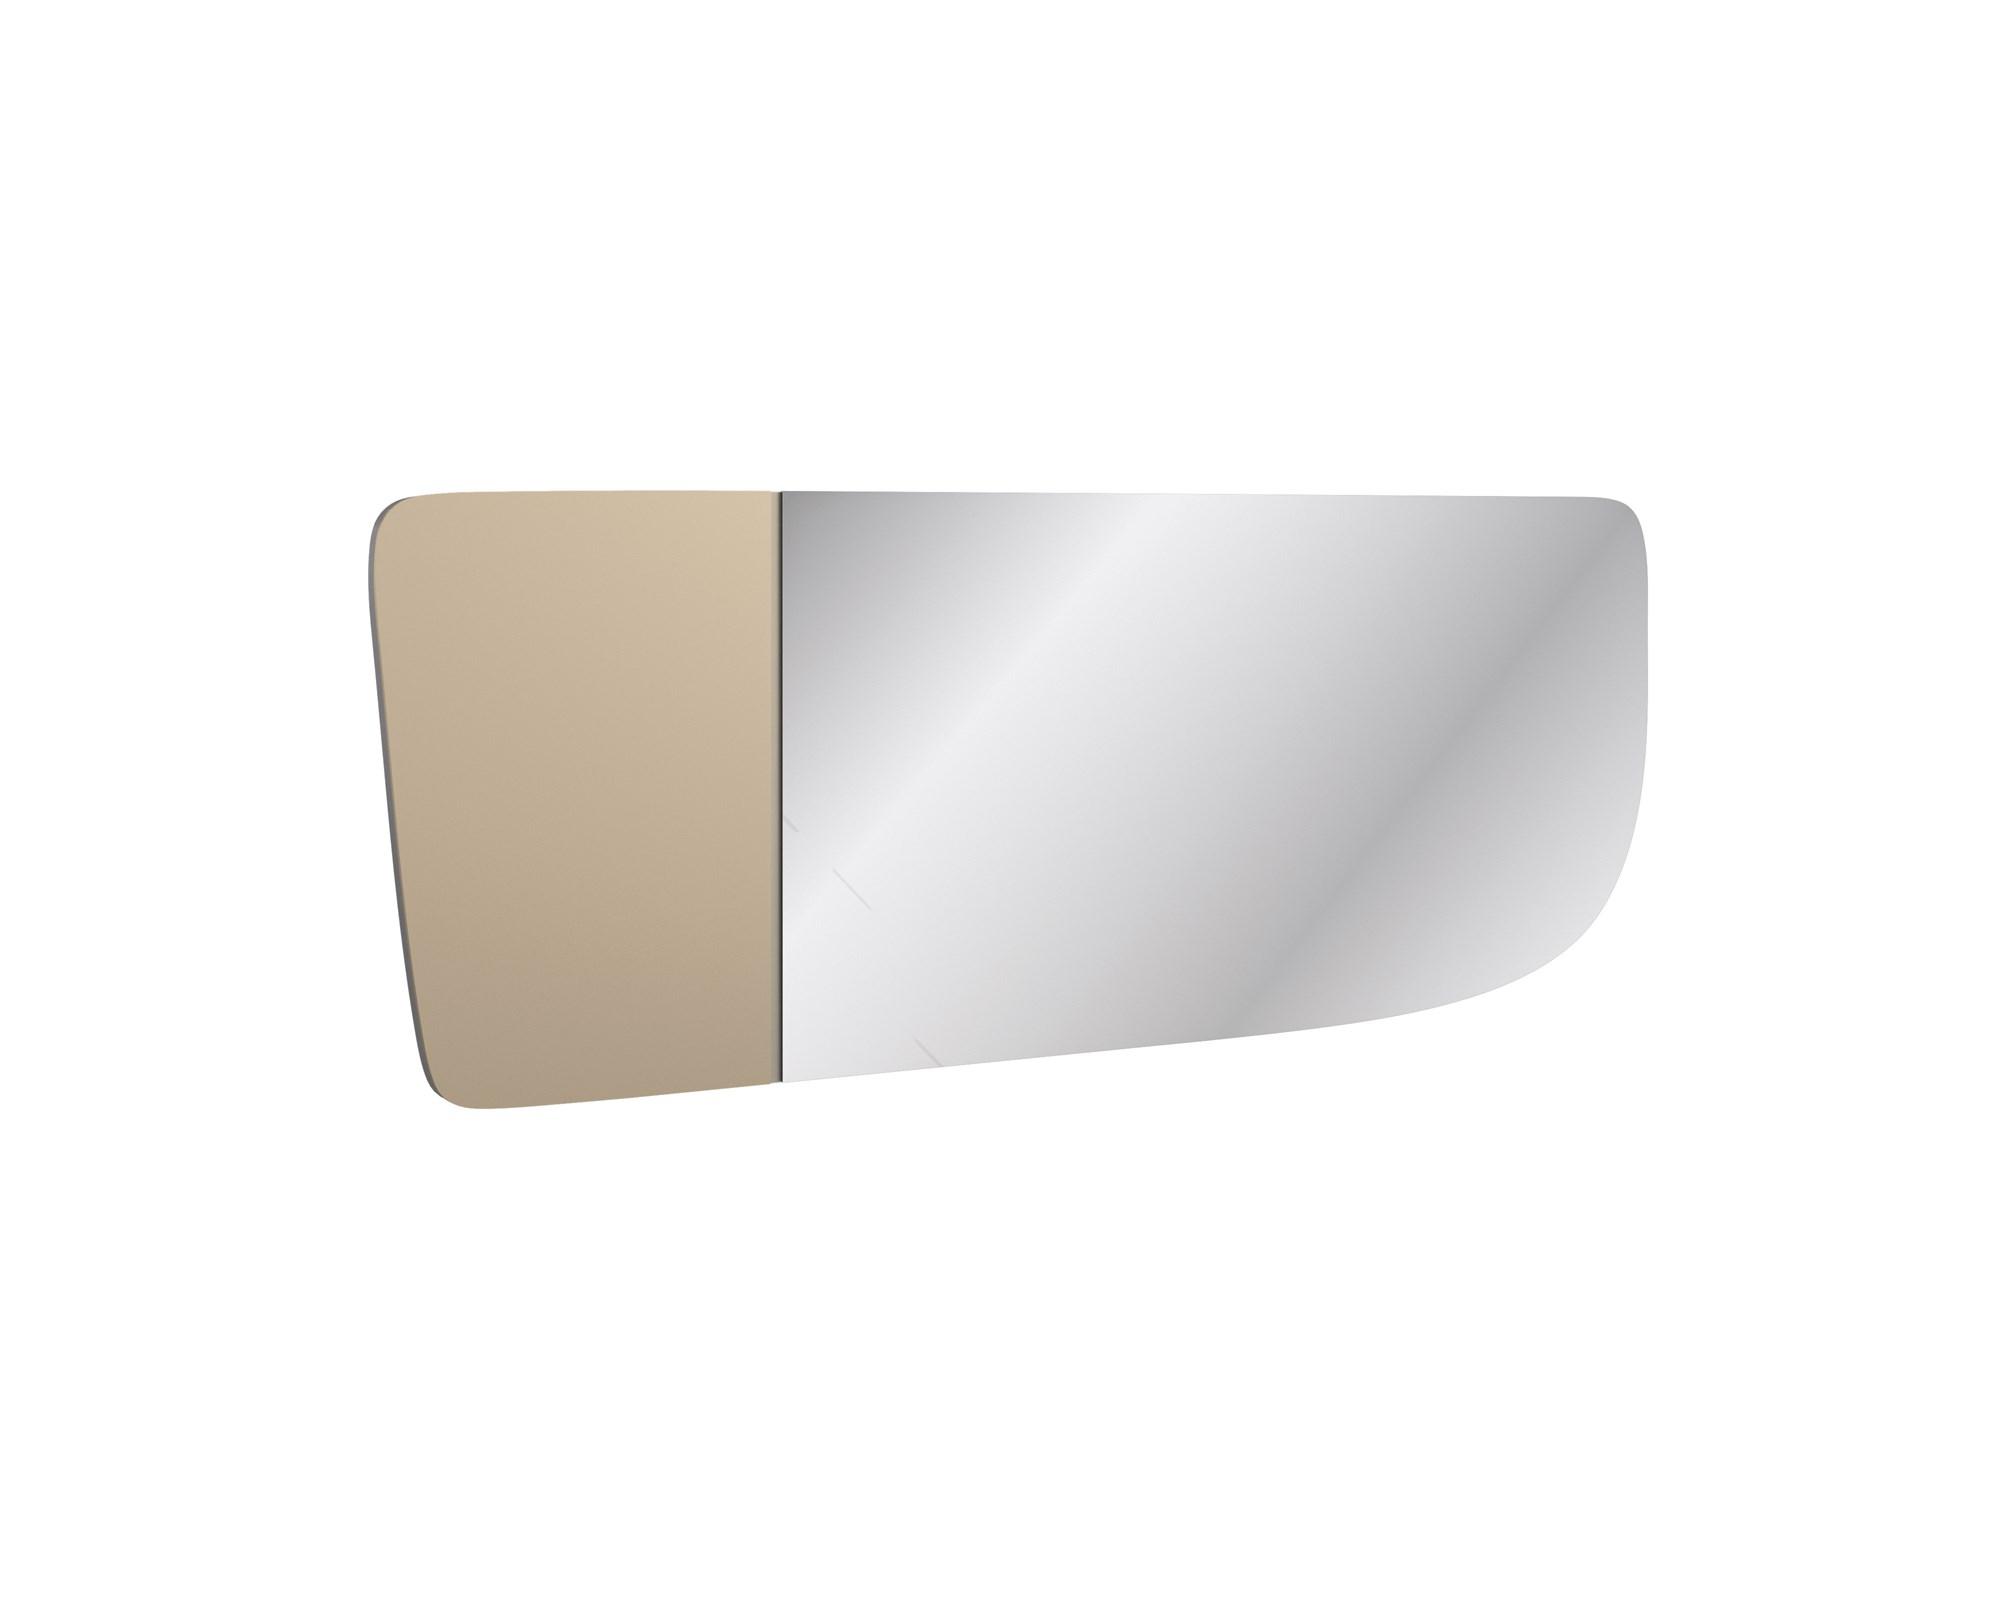 

    
M133-421-011 M133-421-041 Sepia & Smoked Stainless Steel Paint Finish LA MODA DRESSER W/ Mirror by Caracole
